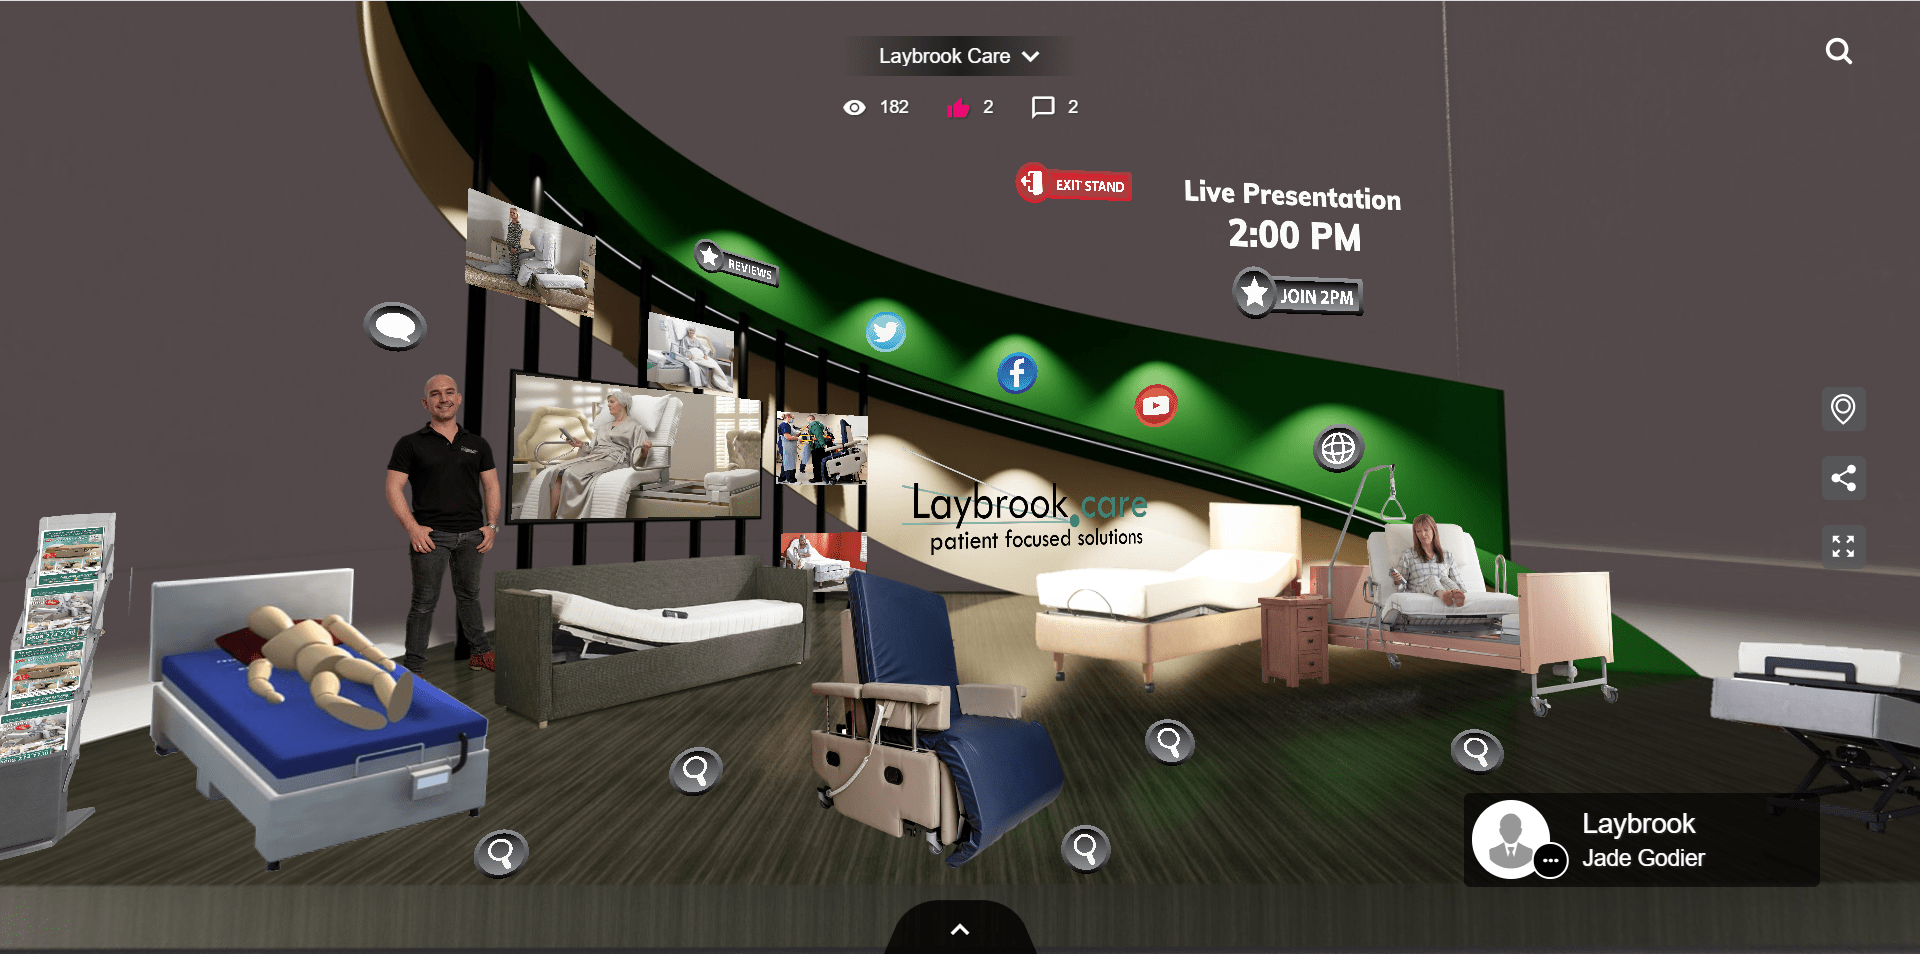 (Laybrook Care exhibited at the virtual exhibition of Rise Virtual -
			Handling & Mobility in April 2021)